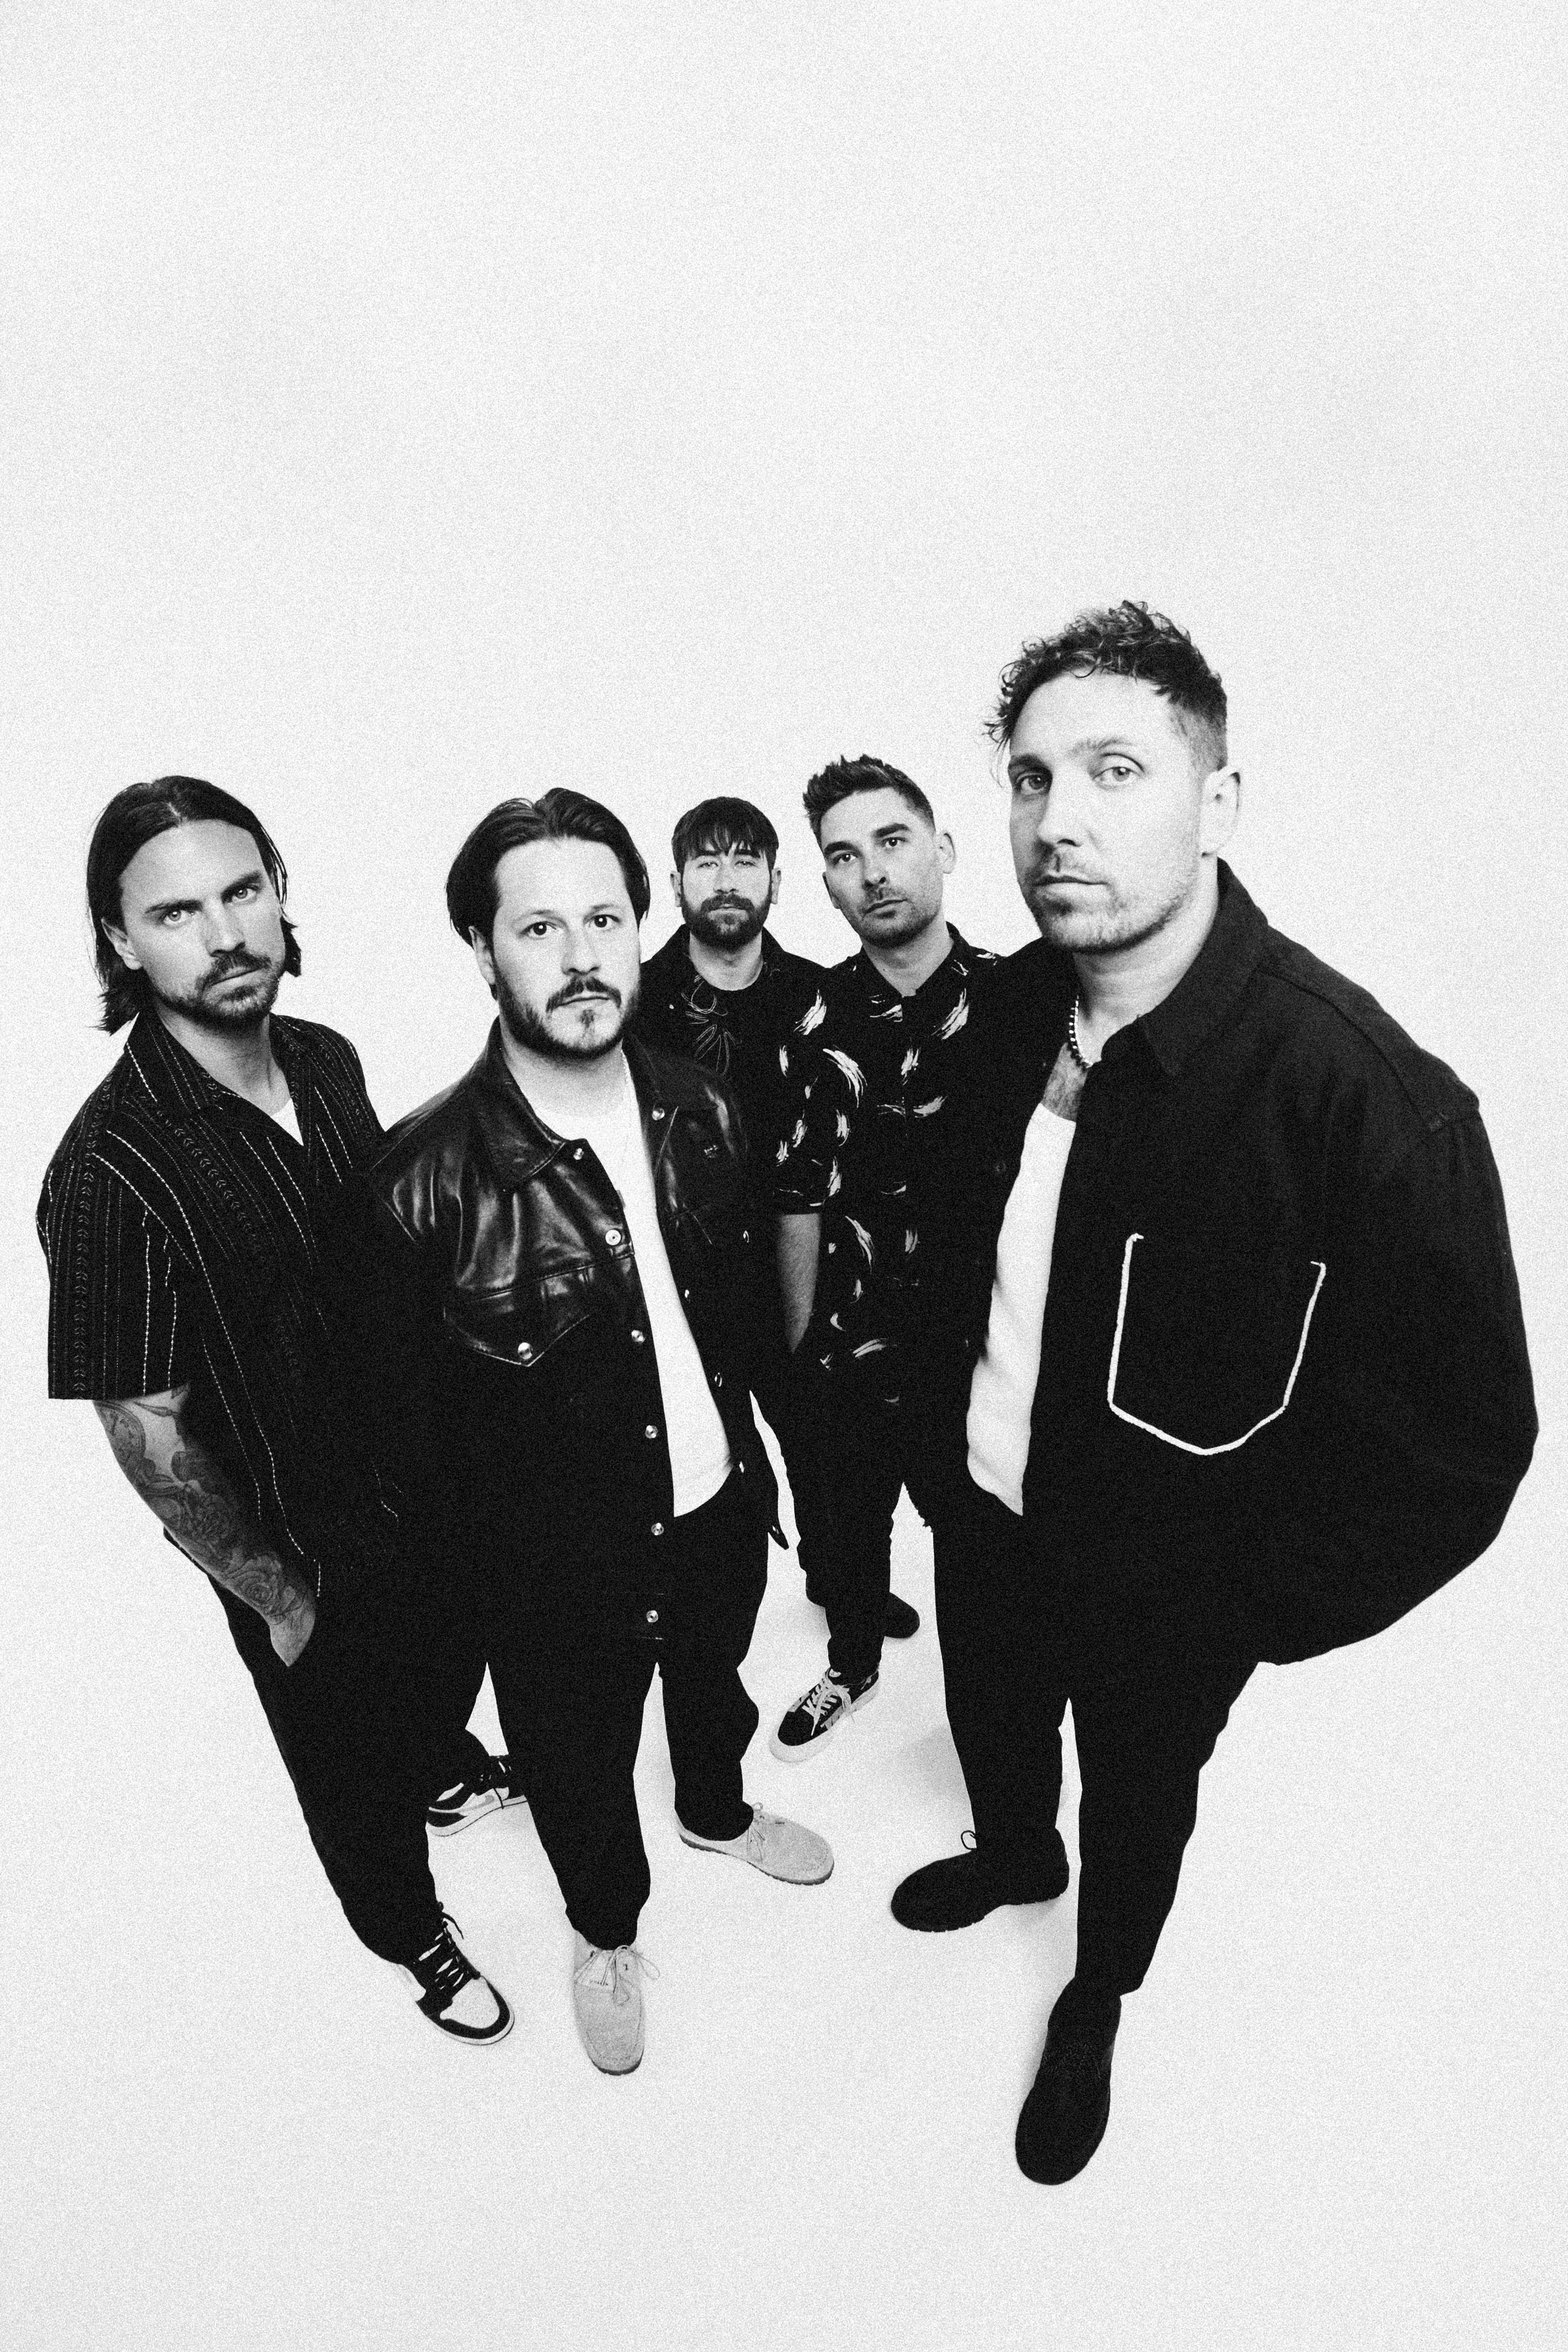 You Me At Six - the Final Nights of Six presale password